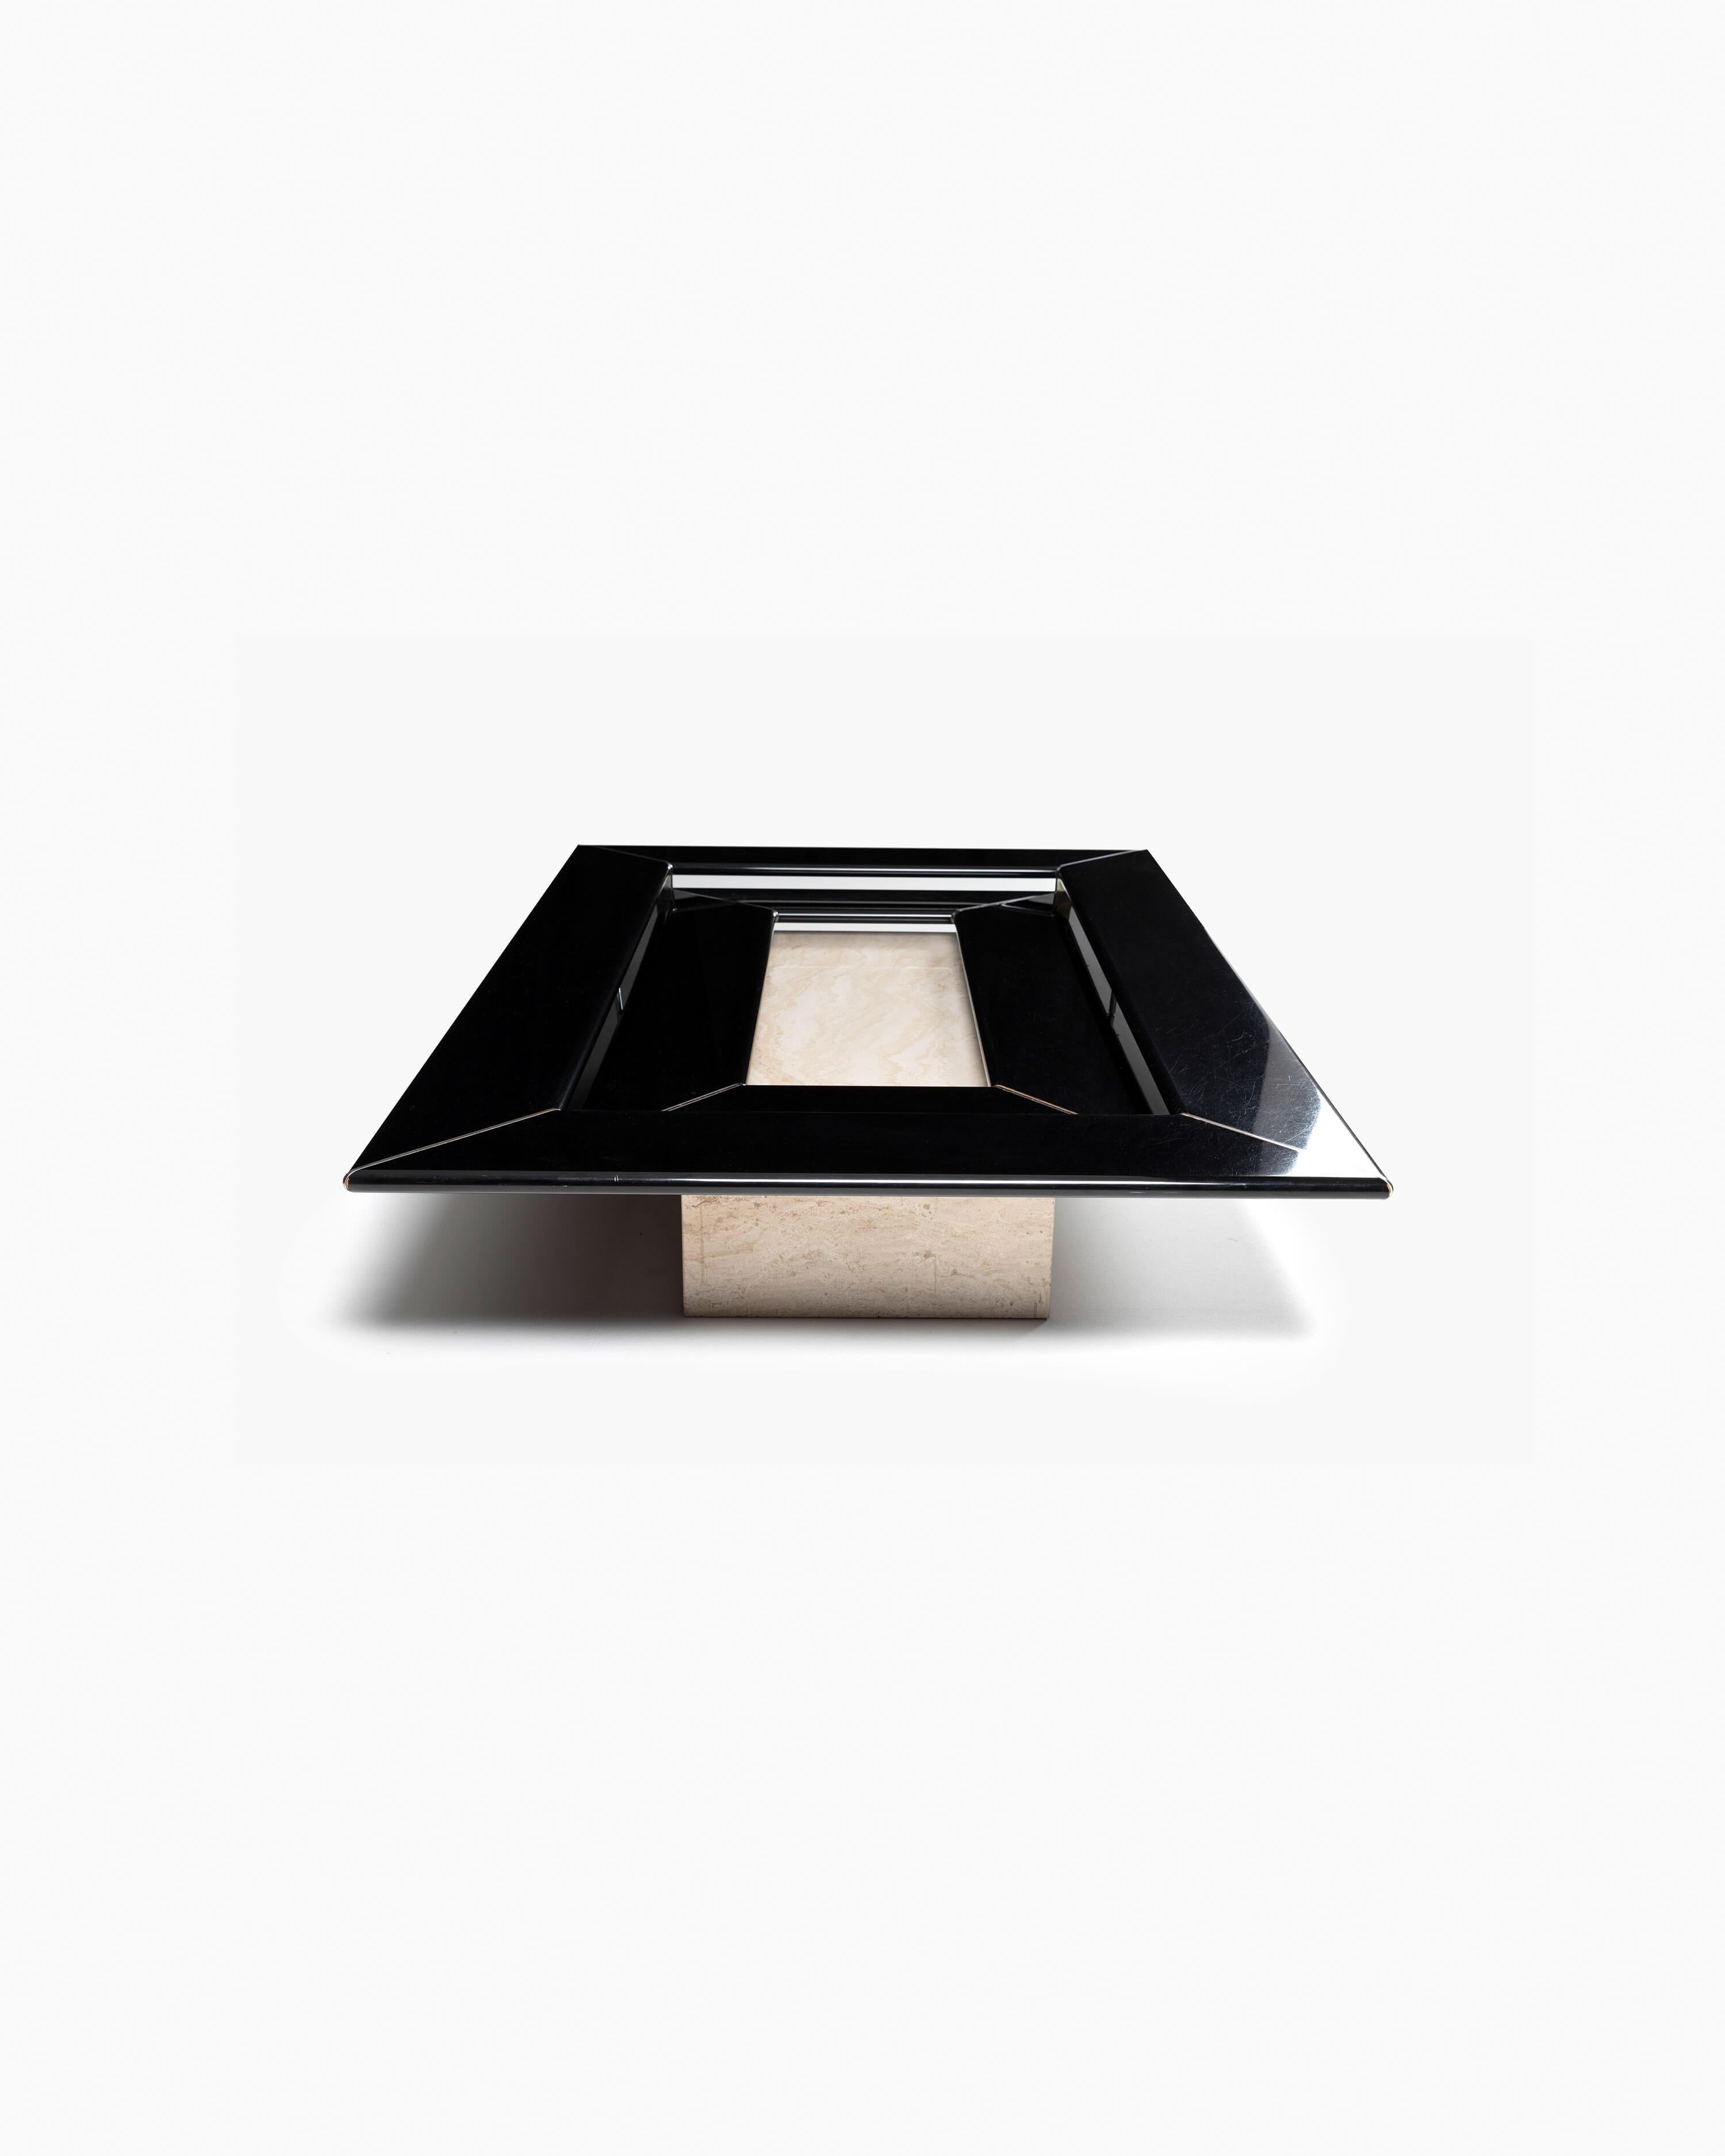 The Re Quatro coffee table is an iconic piece that ushered in the 1980s– a period with a wealth of strong, daring stylistic features, often in dialogue with architecture. The black lacquered top forms two layers of an inverted pyramid as the form